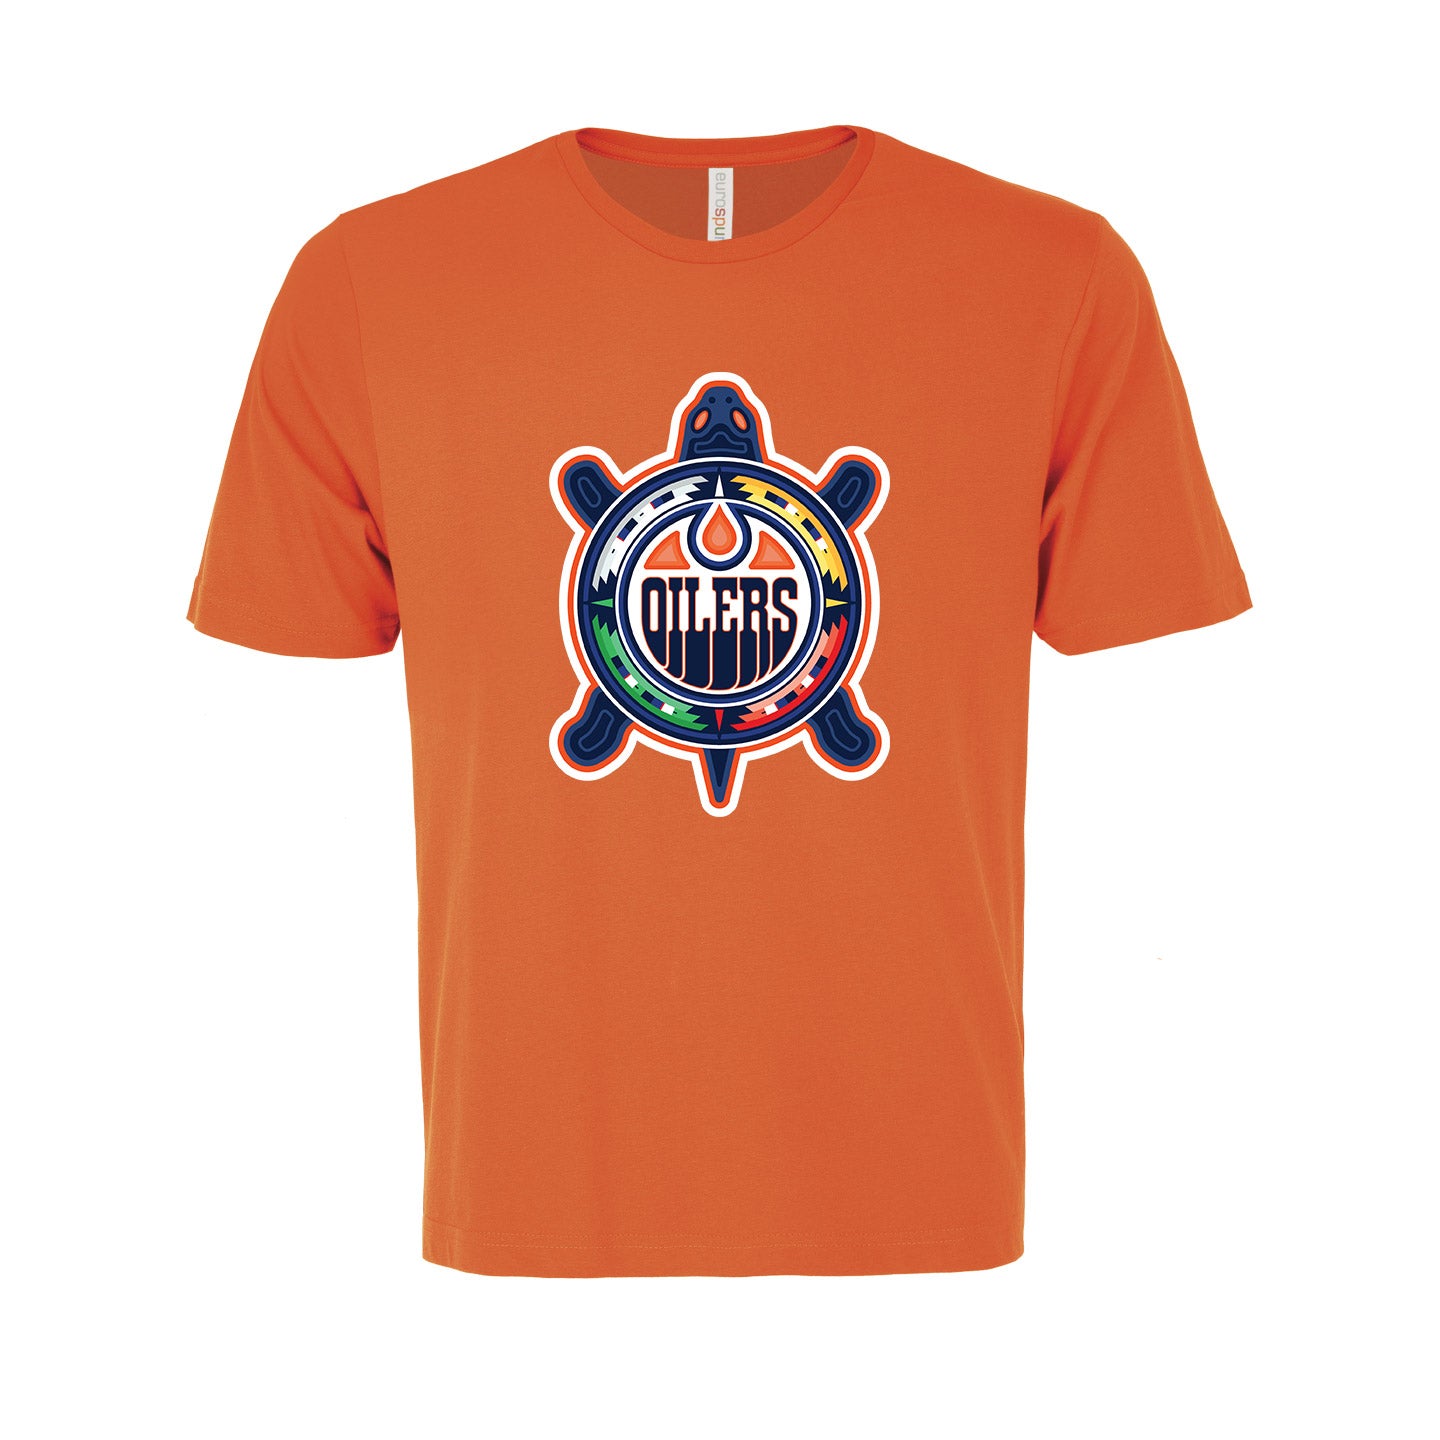 ICE District Authentics - Heading to the game tonight? Turtle Island gear  is available now! We have apparel, pucks, and more featuring the  @EdmontonOilers Turtle Island Logo designed by @lancecardinal75! All  proceeds